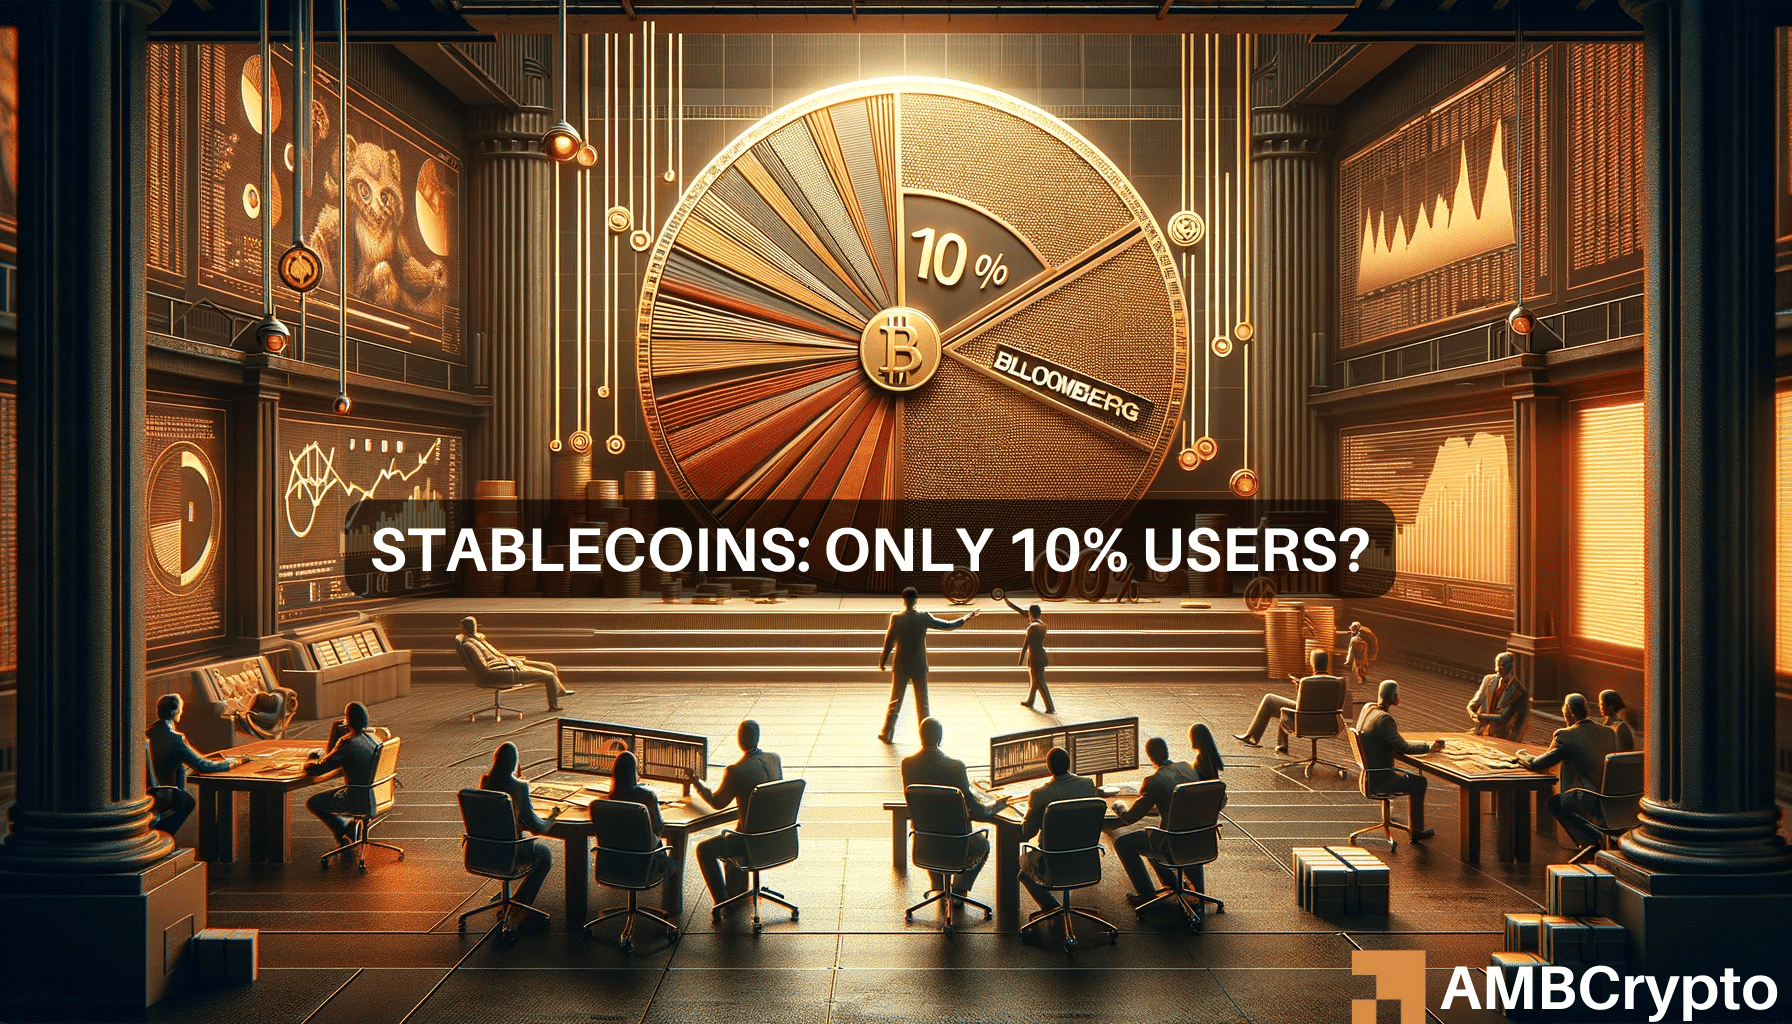 Stablecoins dominated by bots, only 10% real users – Visa report